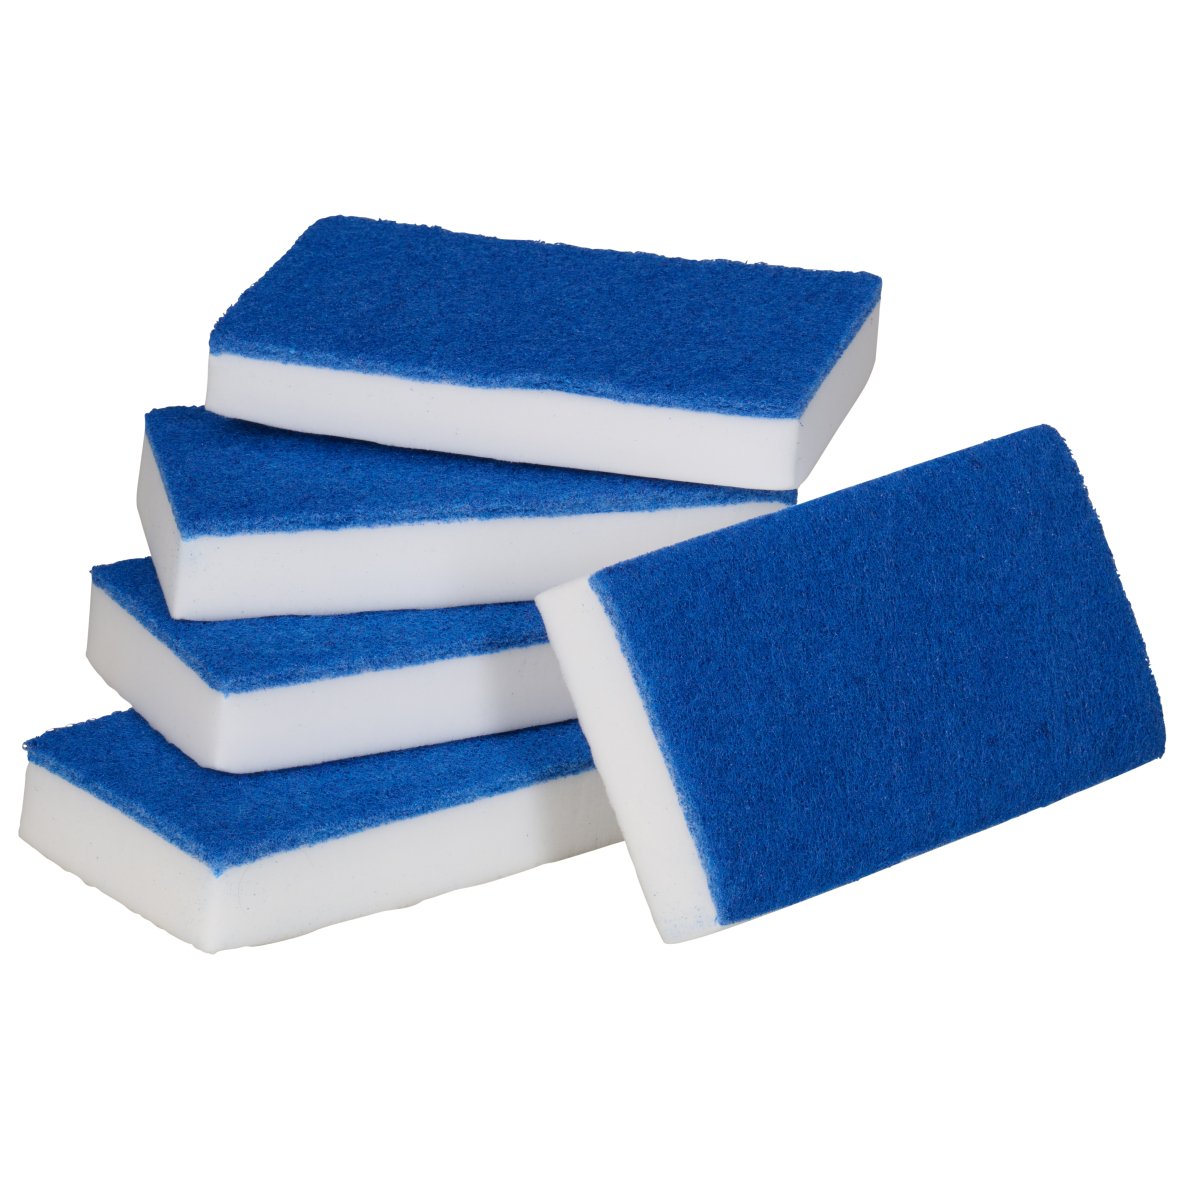 Replacement sponge for Magic Sponge with handle (5 pieces) - 1